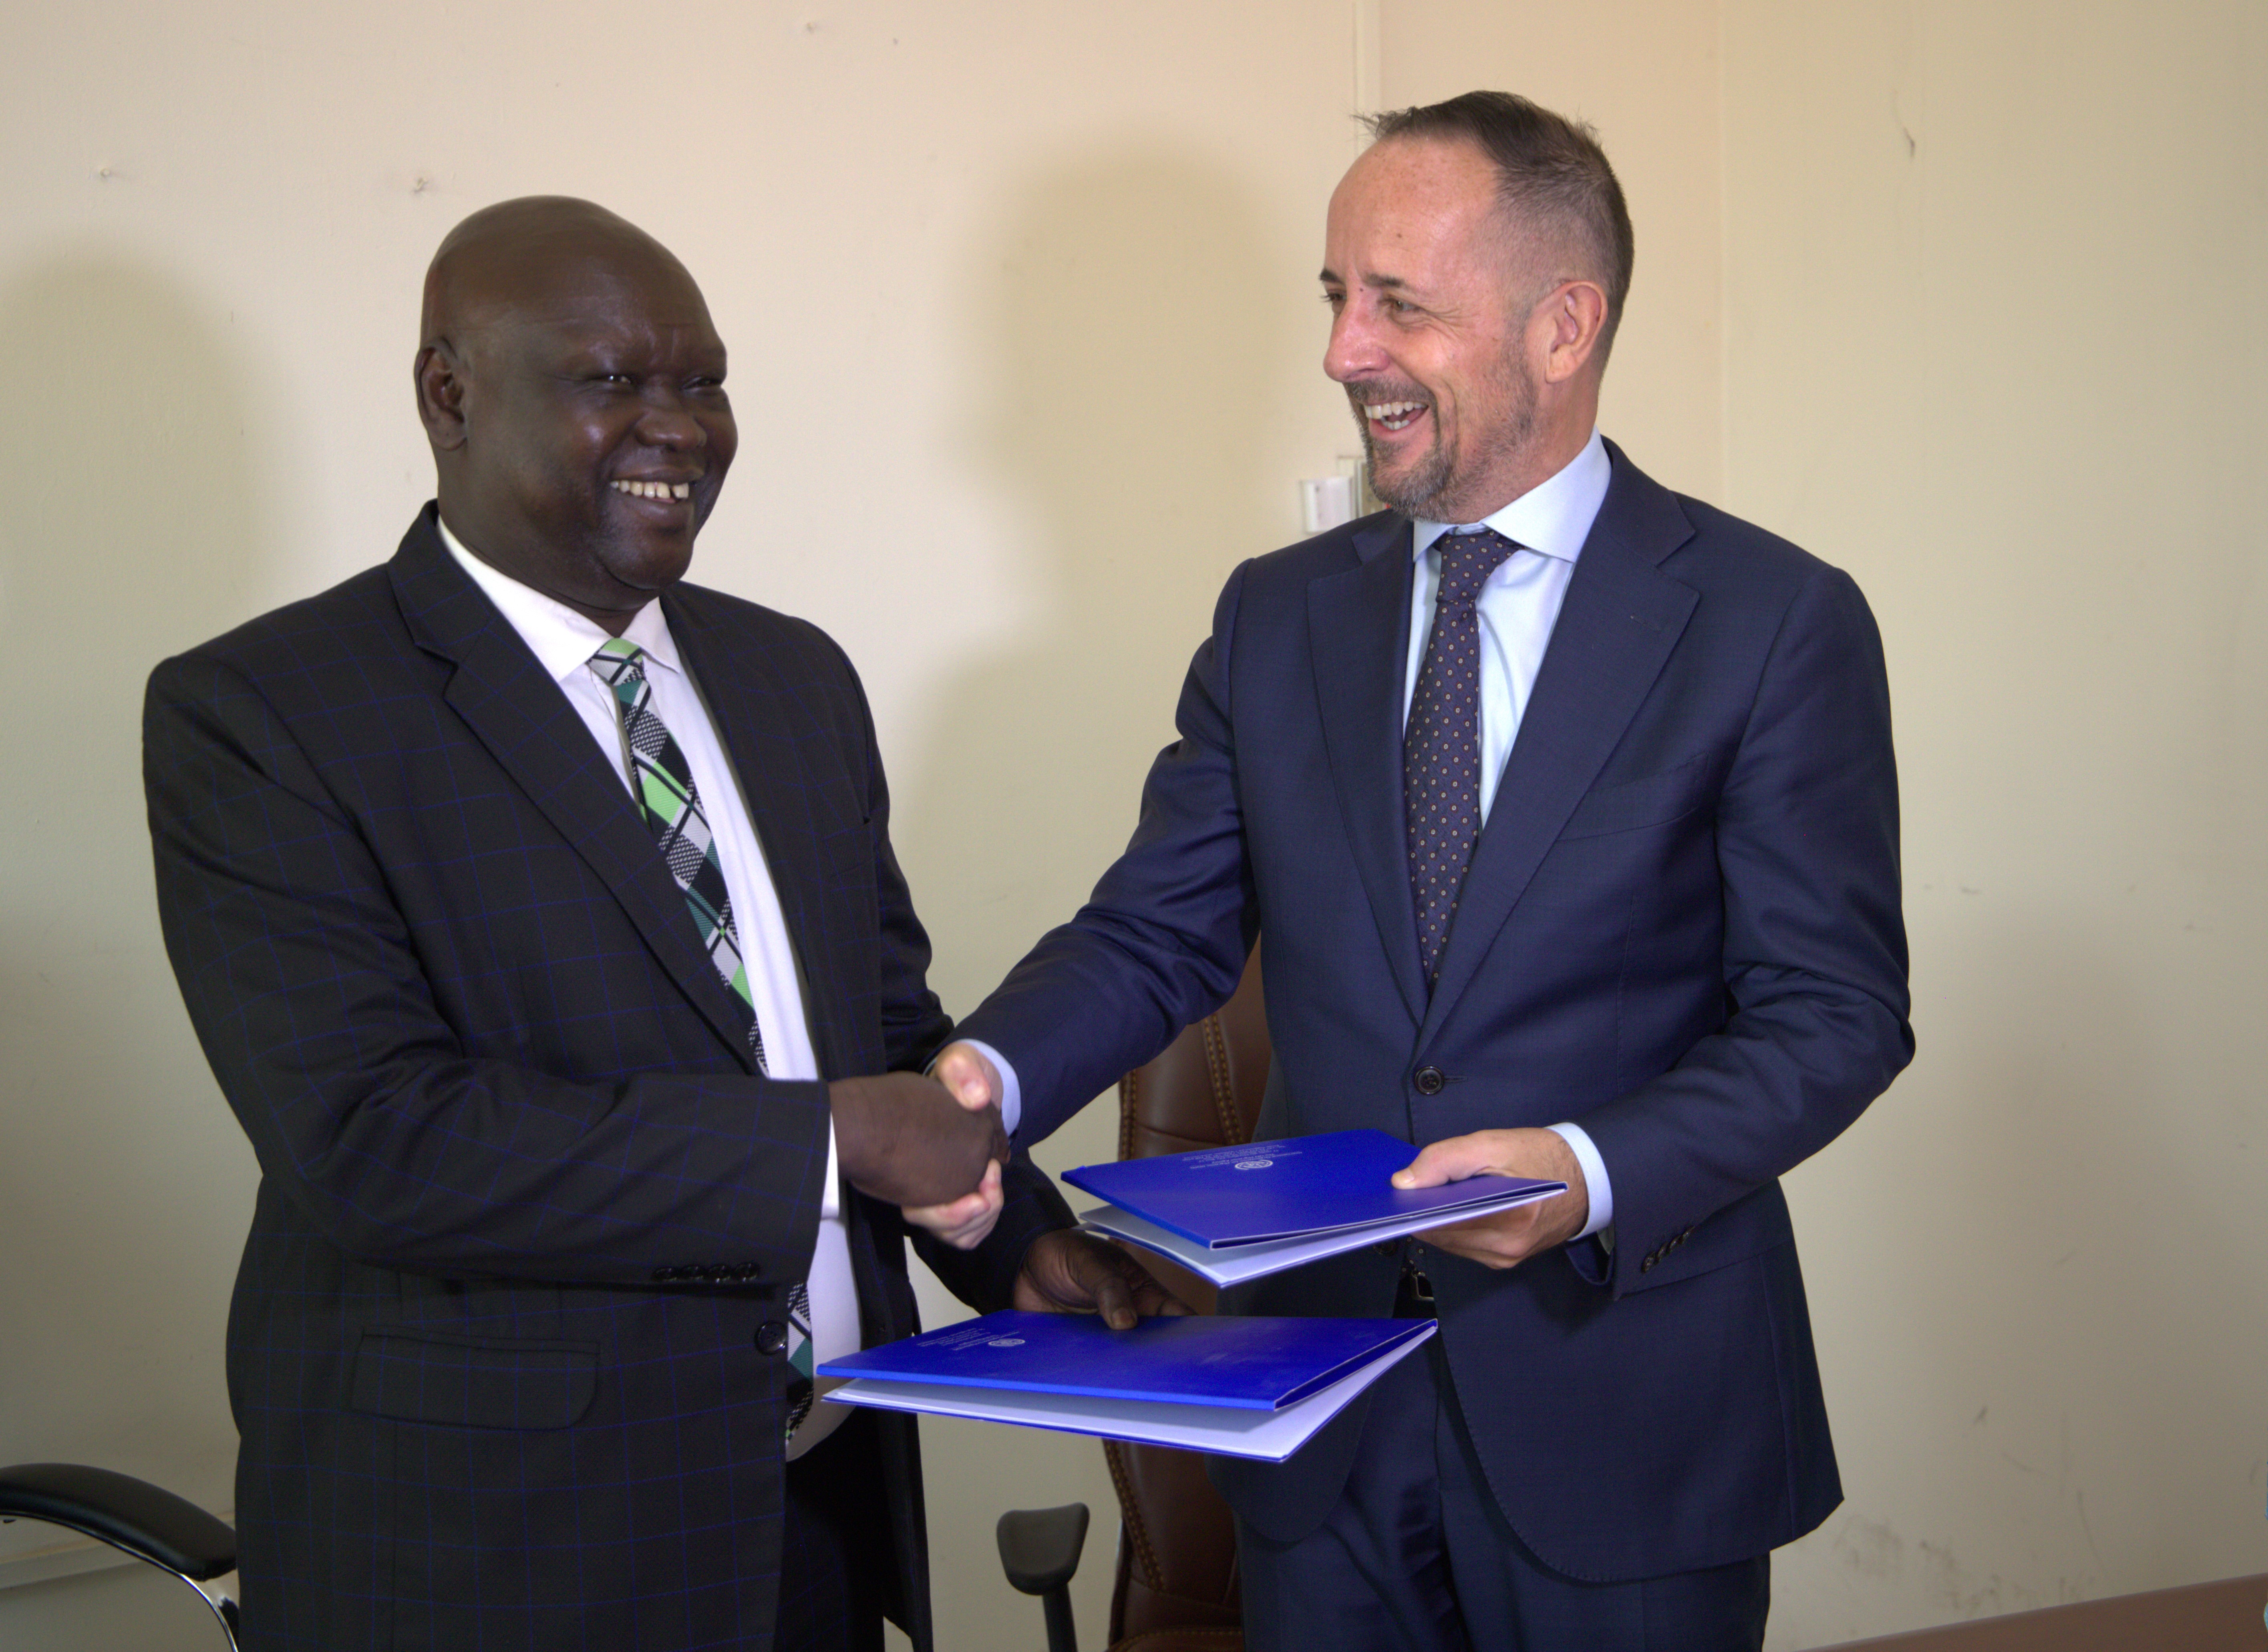 IOM’s Chief of Mission, Mr. Peter Van der Auweraert exchanges the signed MoU with Hon. Stephen Par Kuol, the Minister of Peacebuilding.